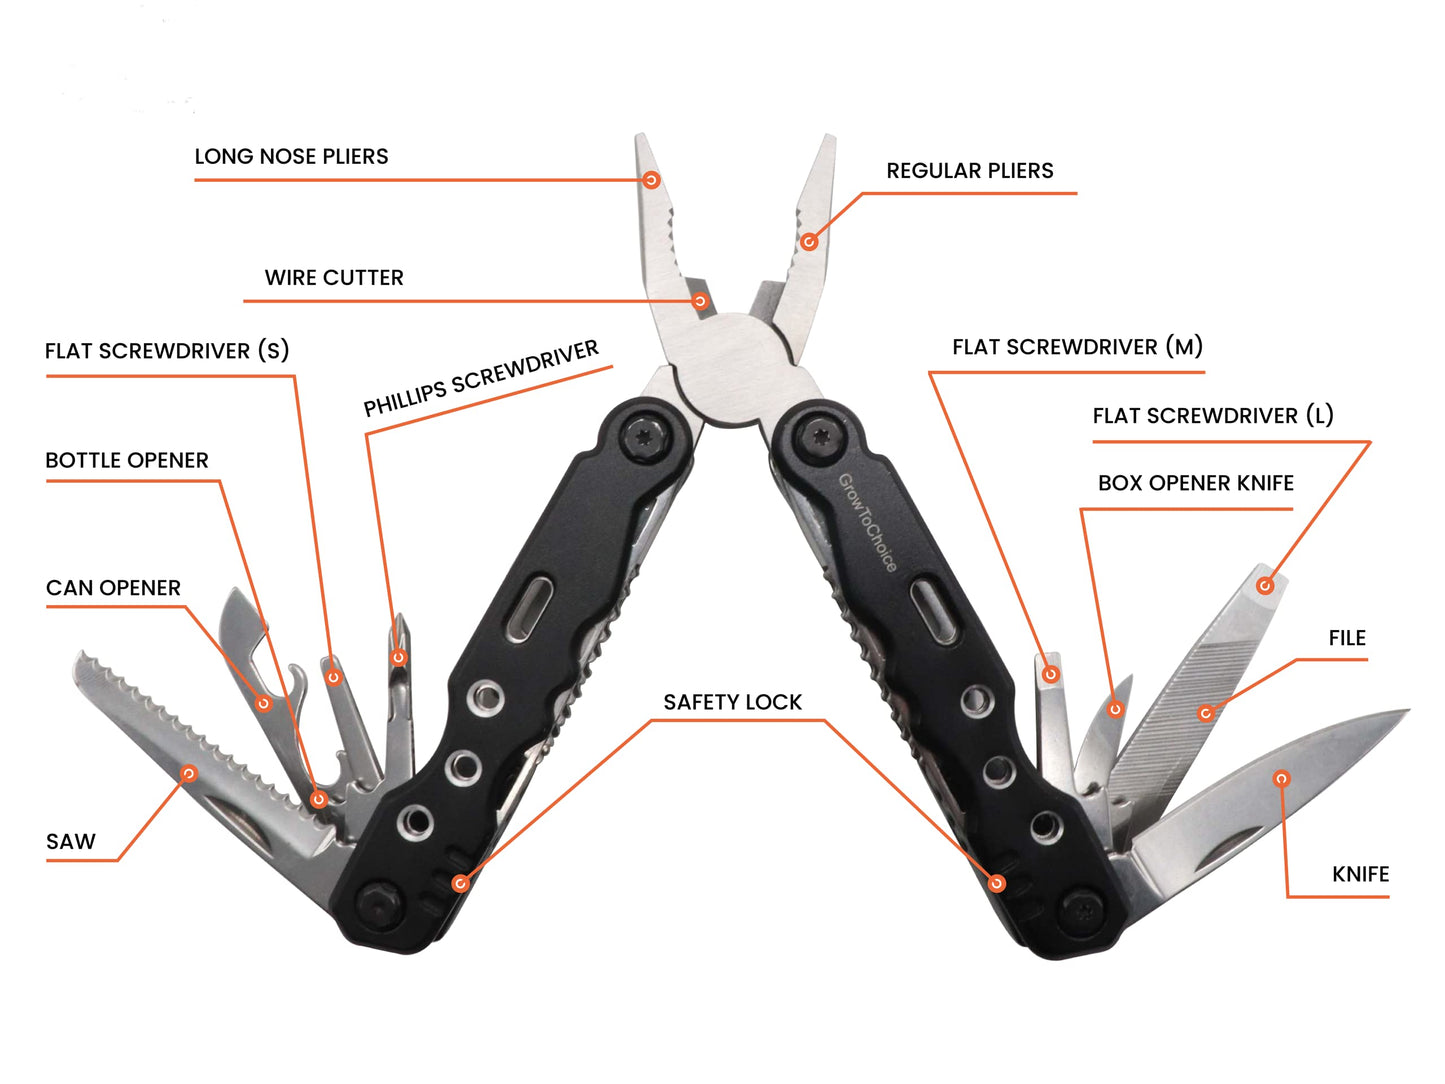 14-In-1 Multitool Pliers Pocket Knife Stainless Steel Swiss Army Knife Camping Accessories - Camping Multi Tool Gifts for Men with Portable Belt Holder Nylon Pouch and Safety Locking Survival Tools